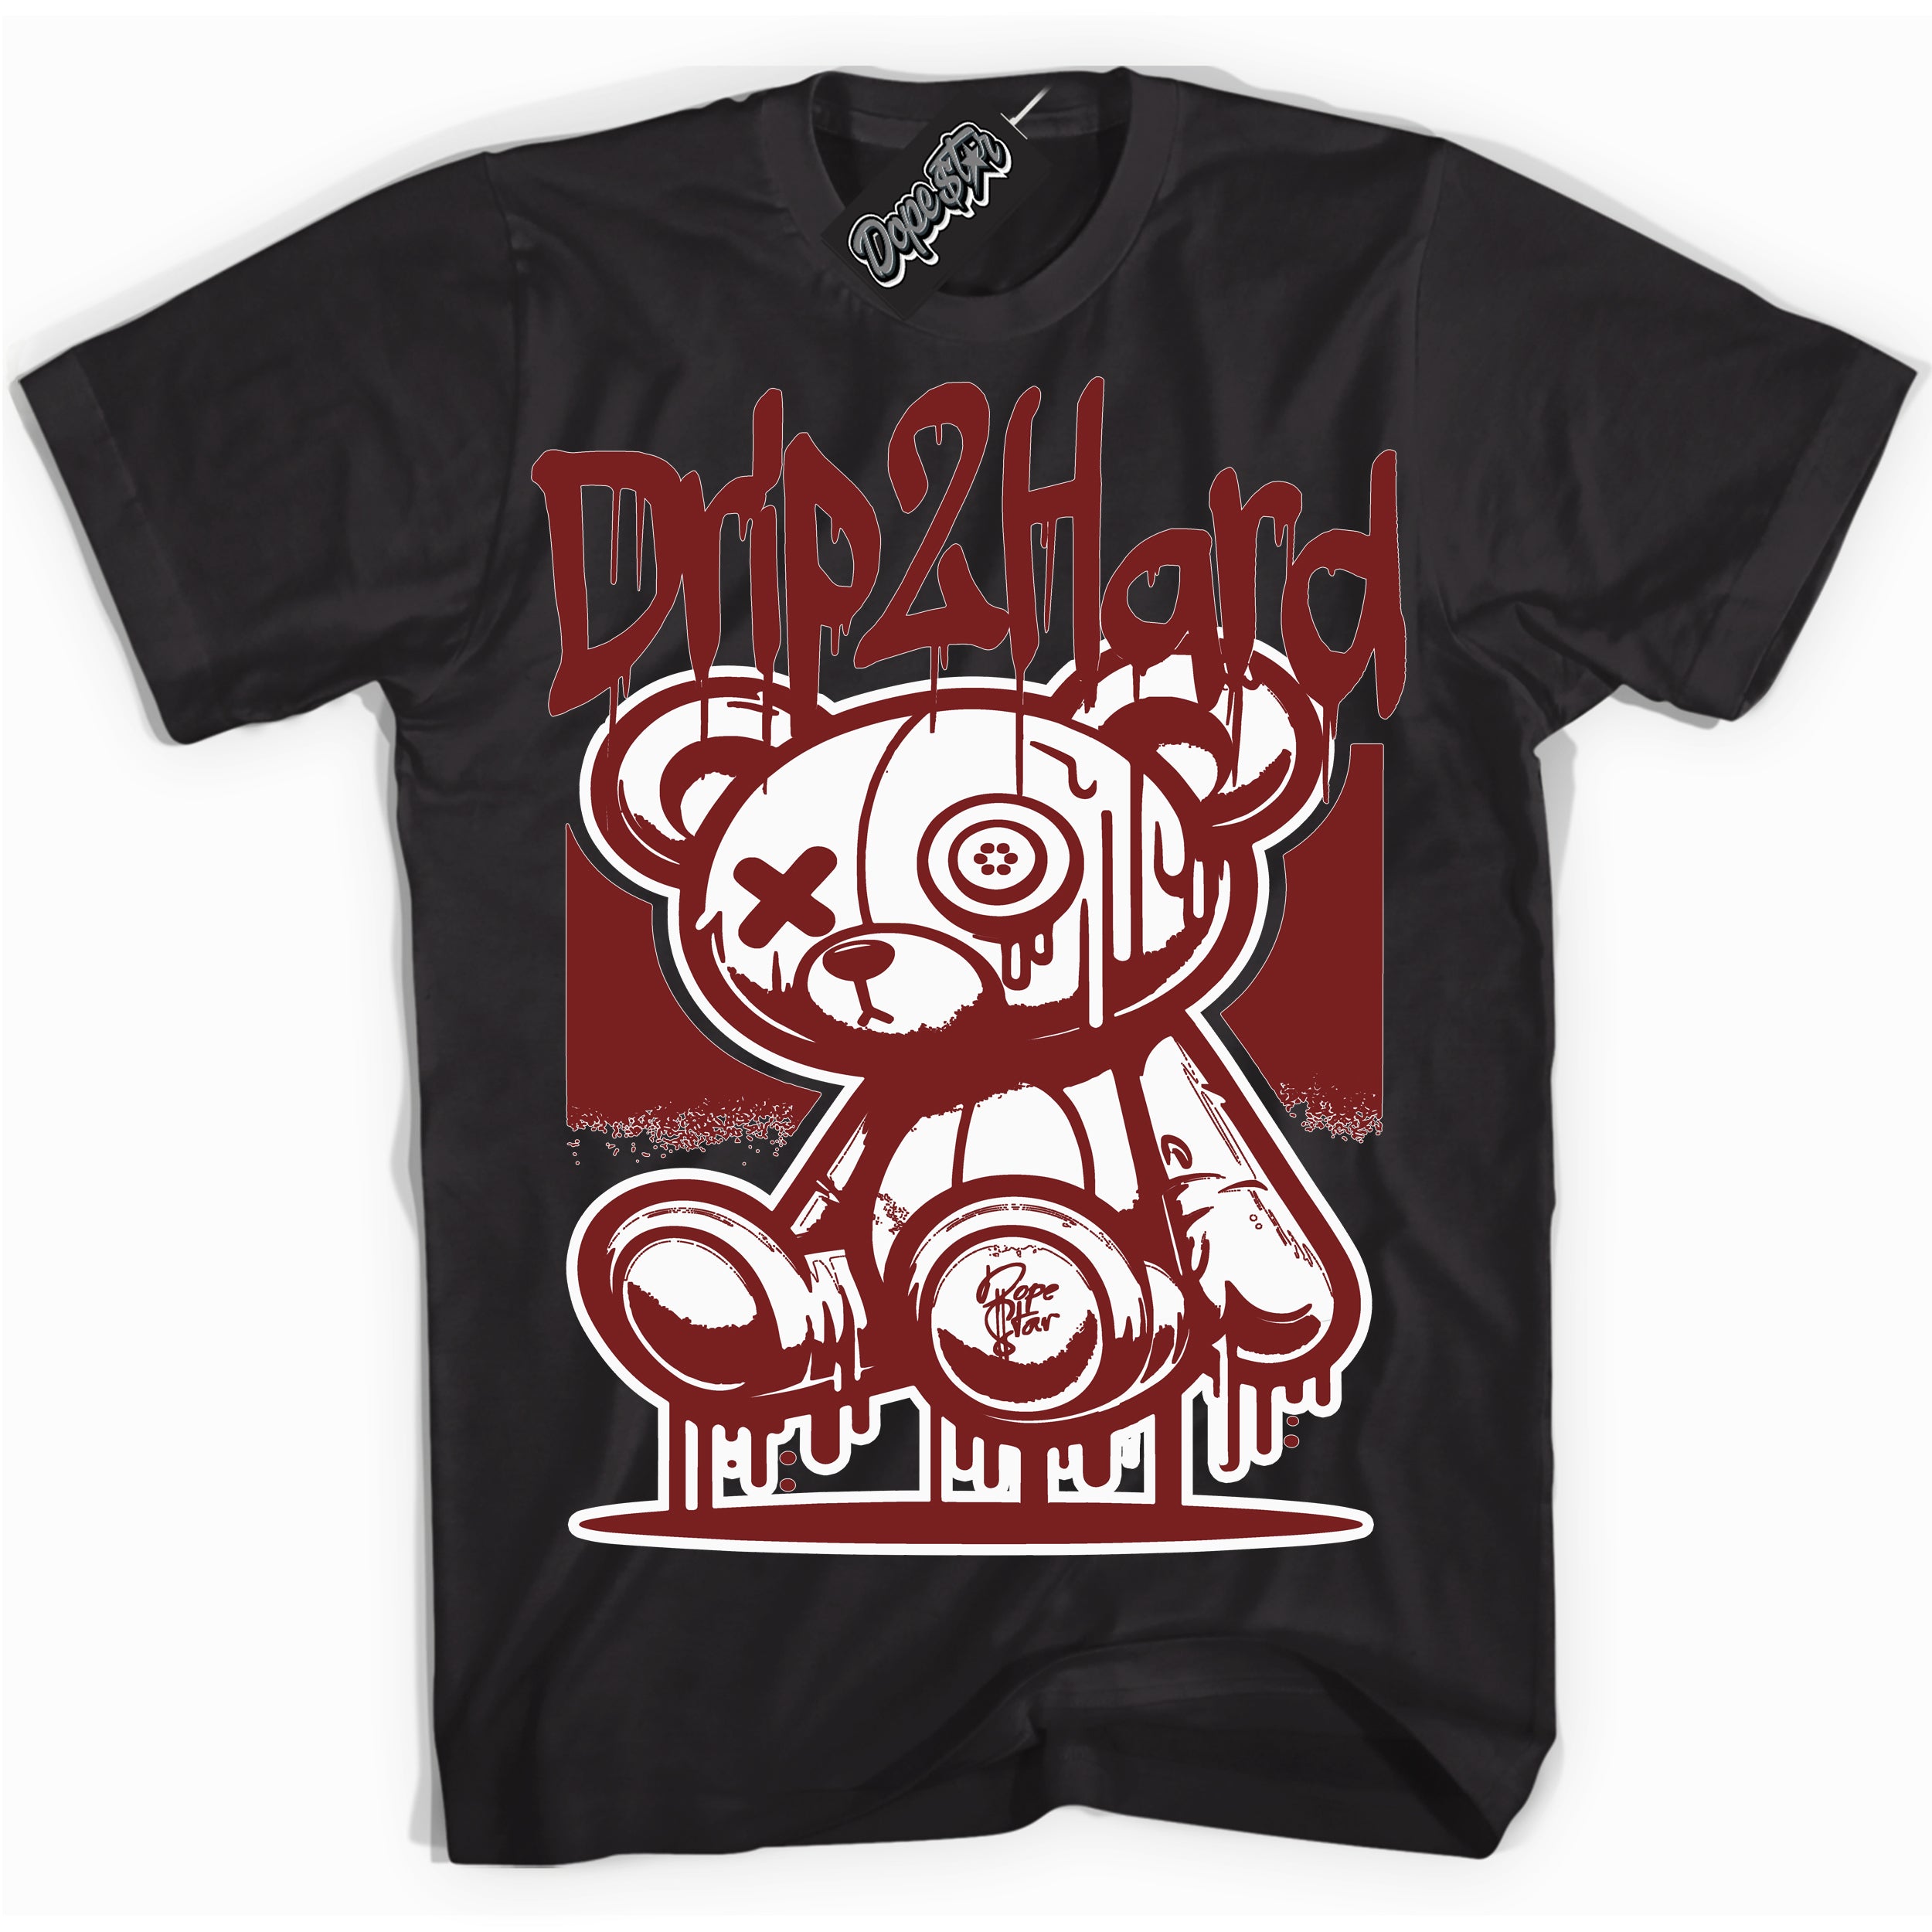 Cool Black graphic tee with “ Drip 2 Hard ” design, that perfectly matches Dune Red 1s sneakers